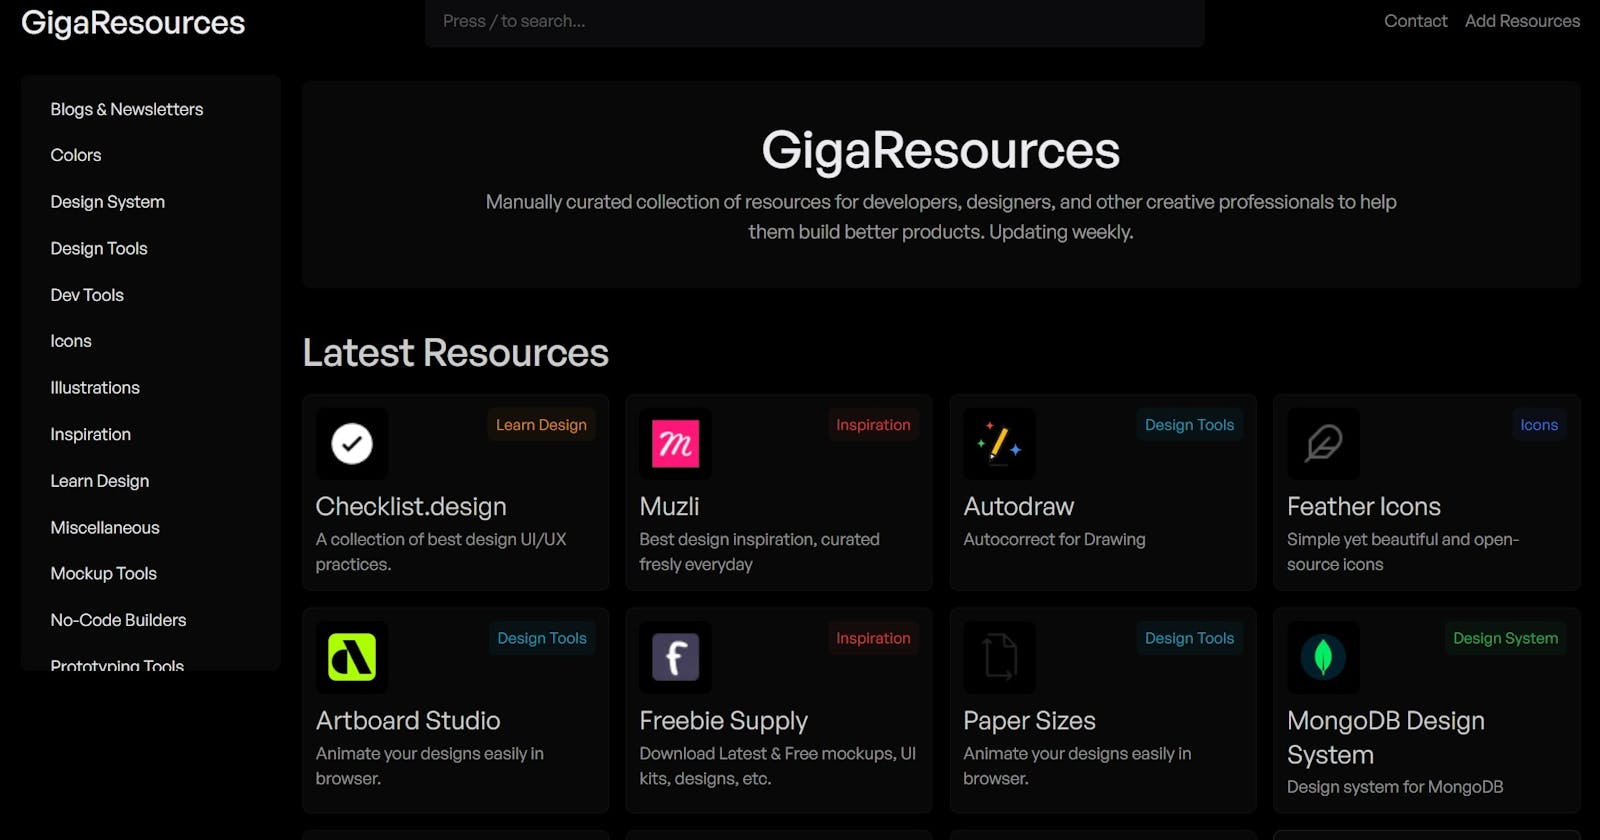 Revolutionize Your Design and Development Process with GigaResources